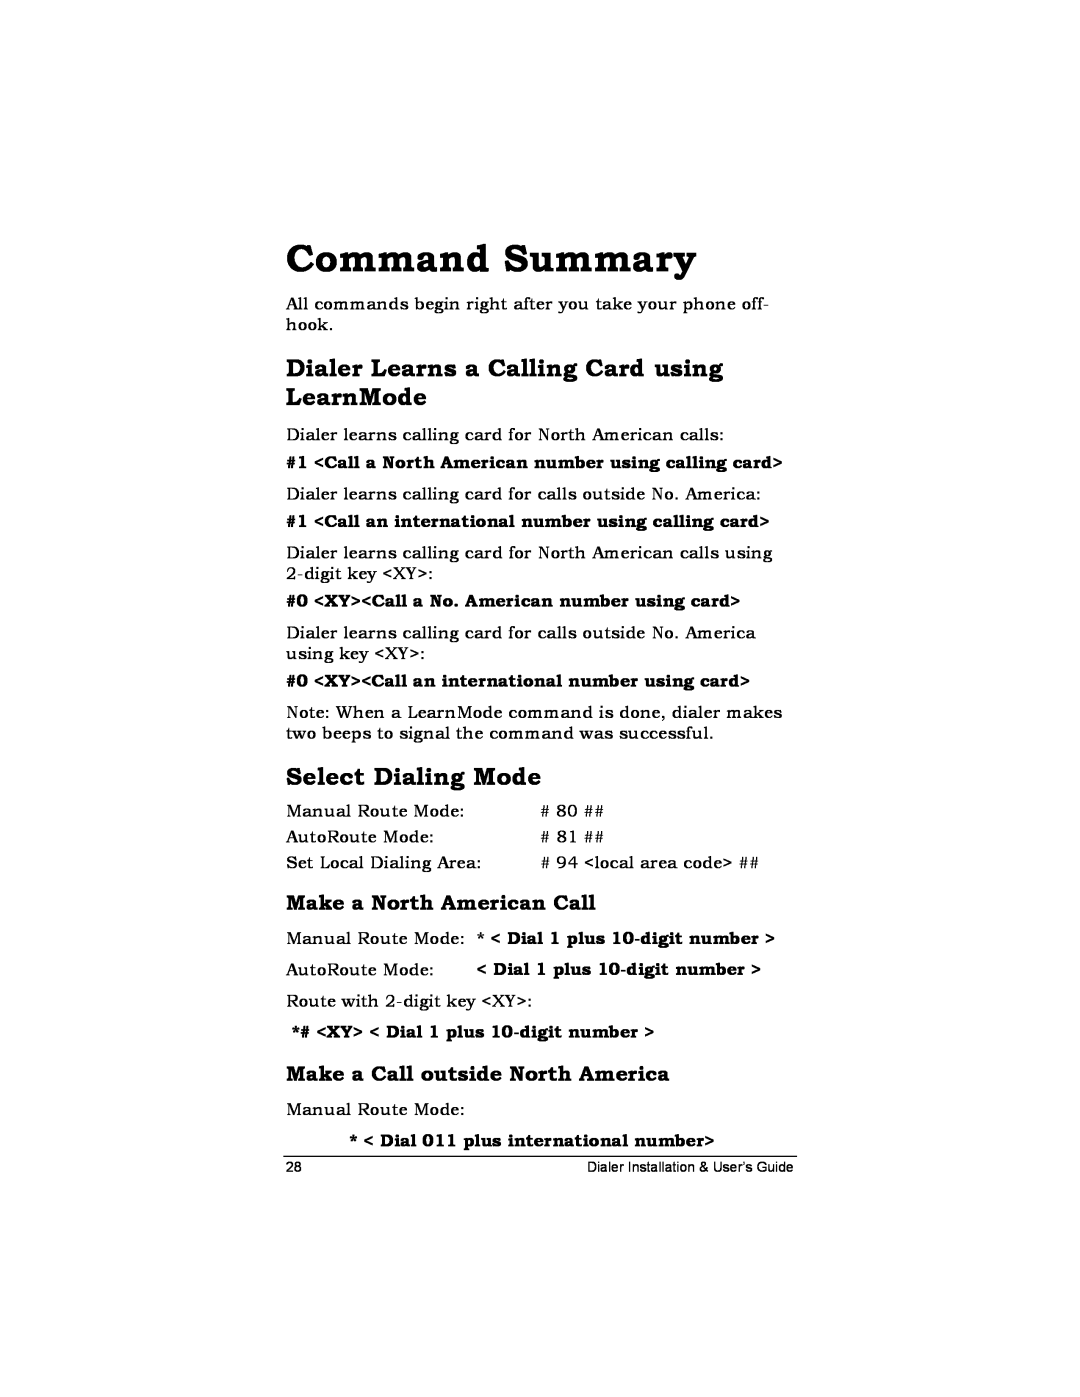 Zoom Dialer 26 manual Command Summary, Dialer Learns a Calling Card using LearnMode, Select Dialing Mode 